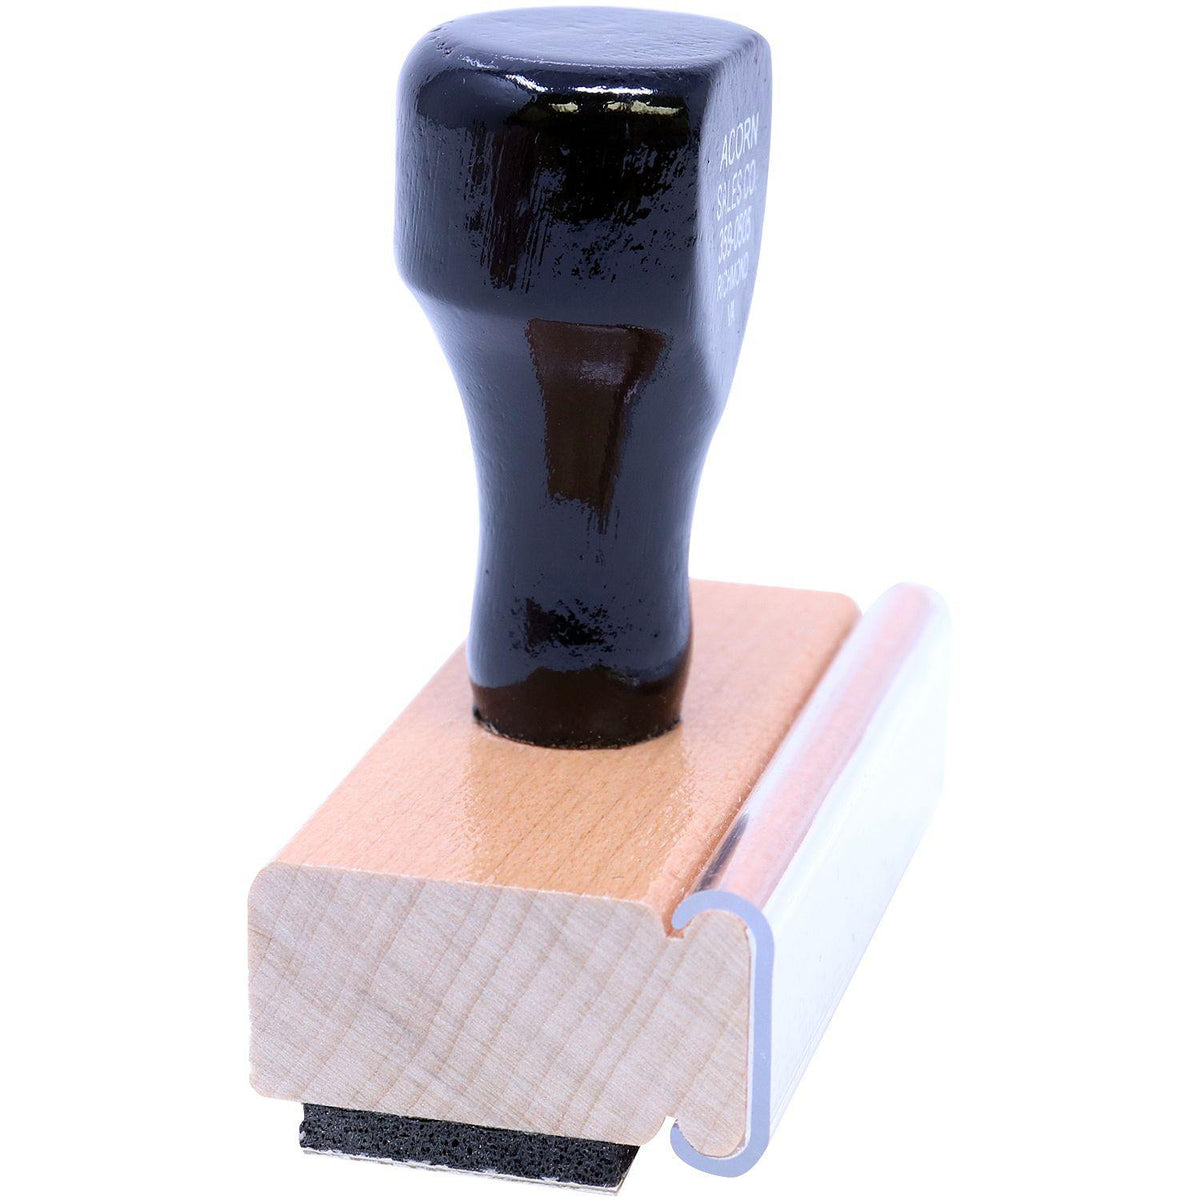 Side View of Government Exhibit Rubber Stamp at an Angle